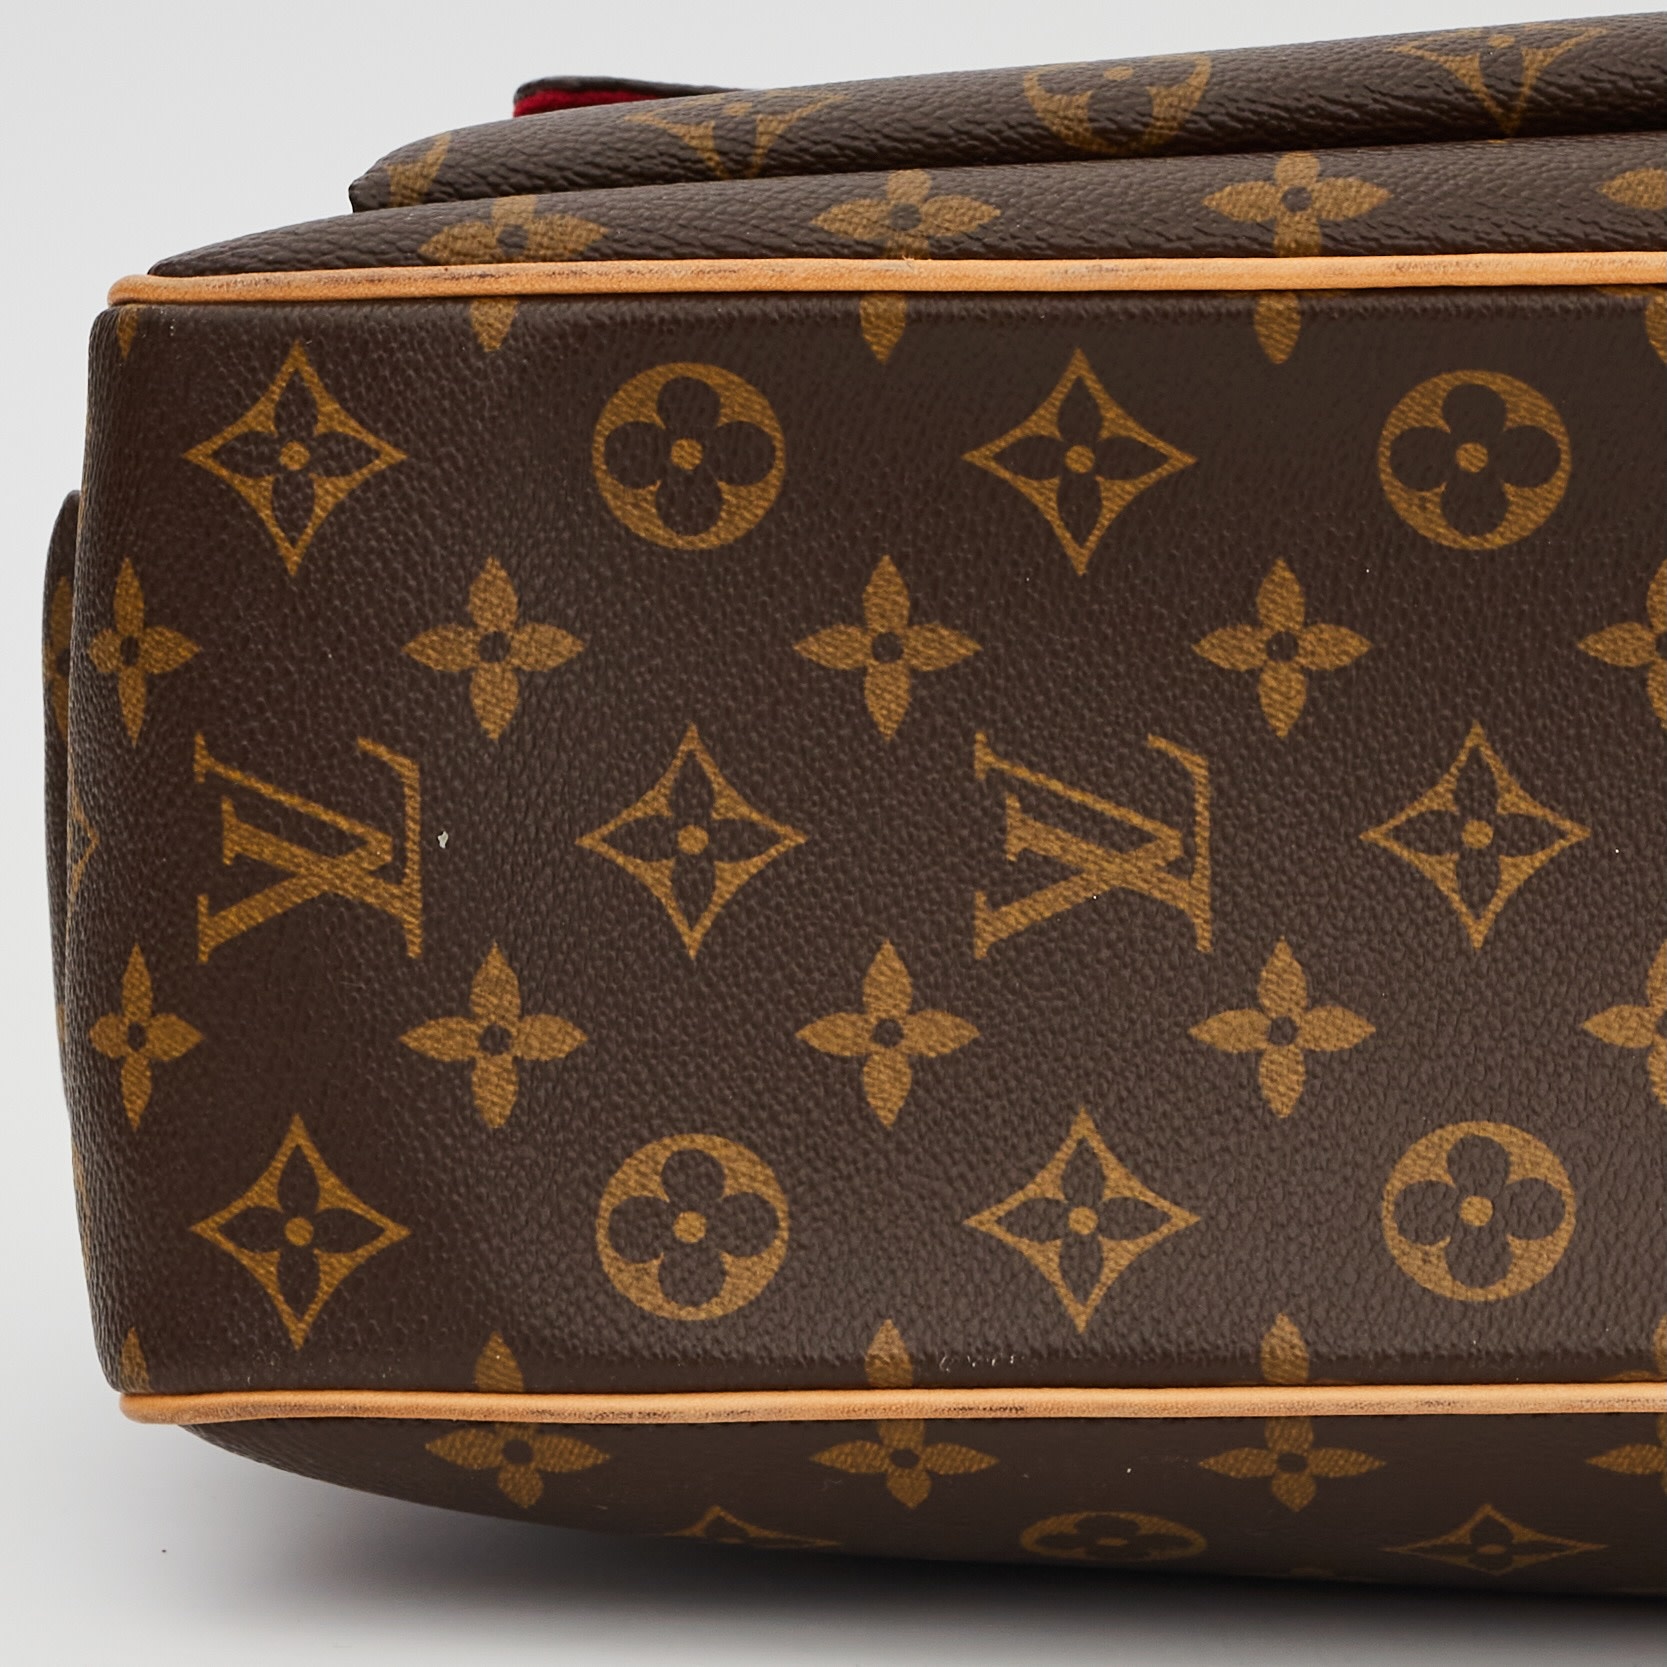 Shop for Louis Vuitton Monogram Canvas Leather Multipli Cite Bag - Shipped  from USA